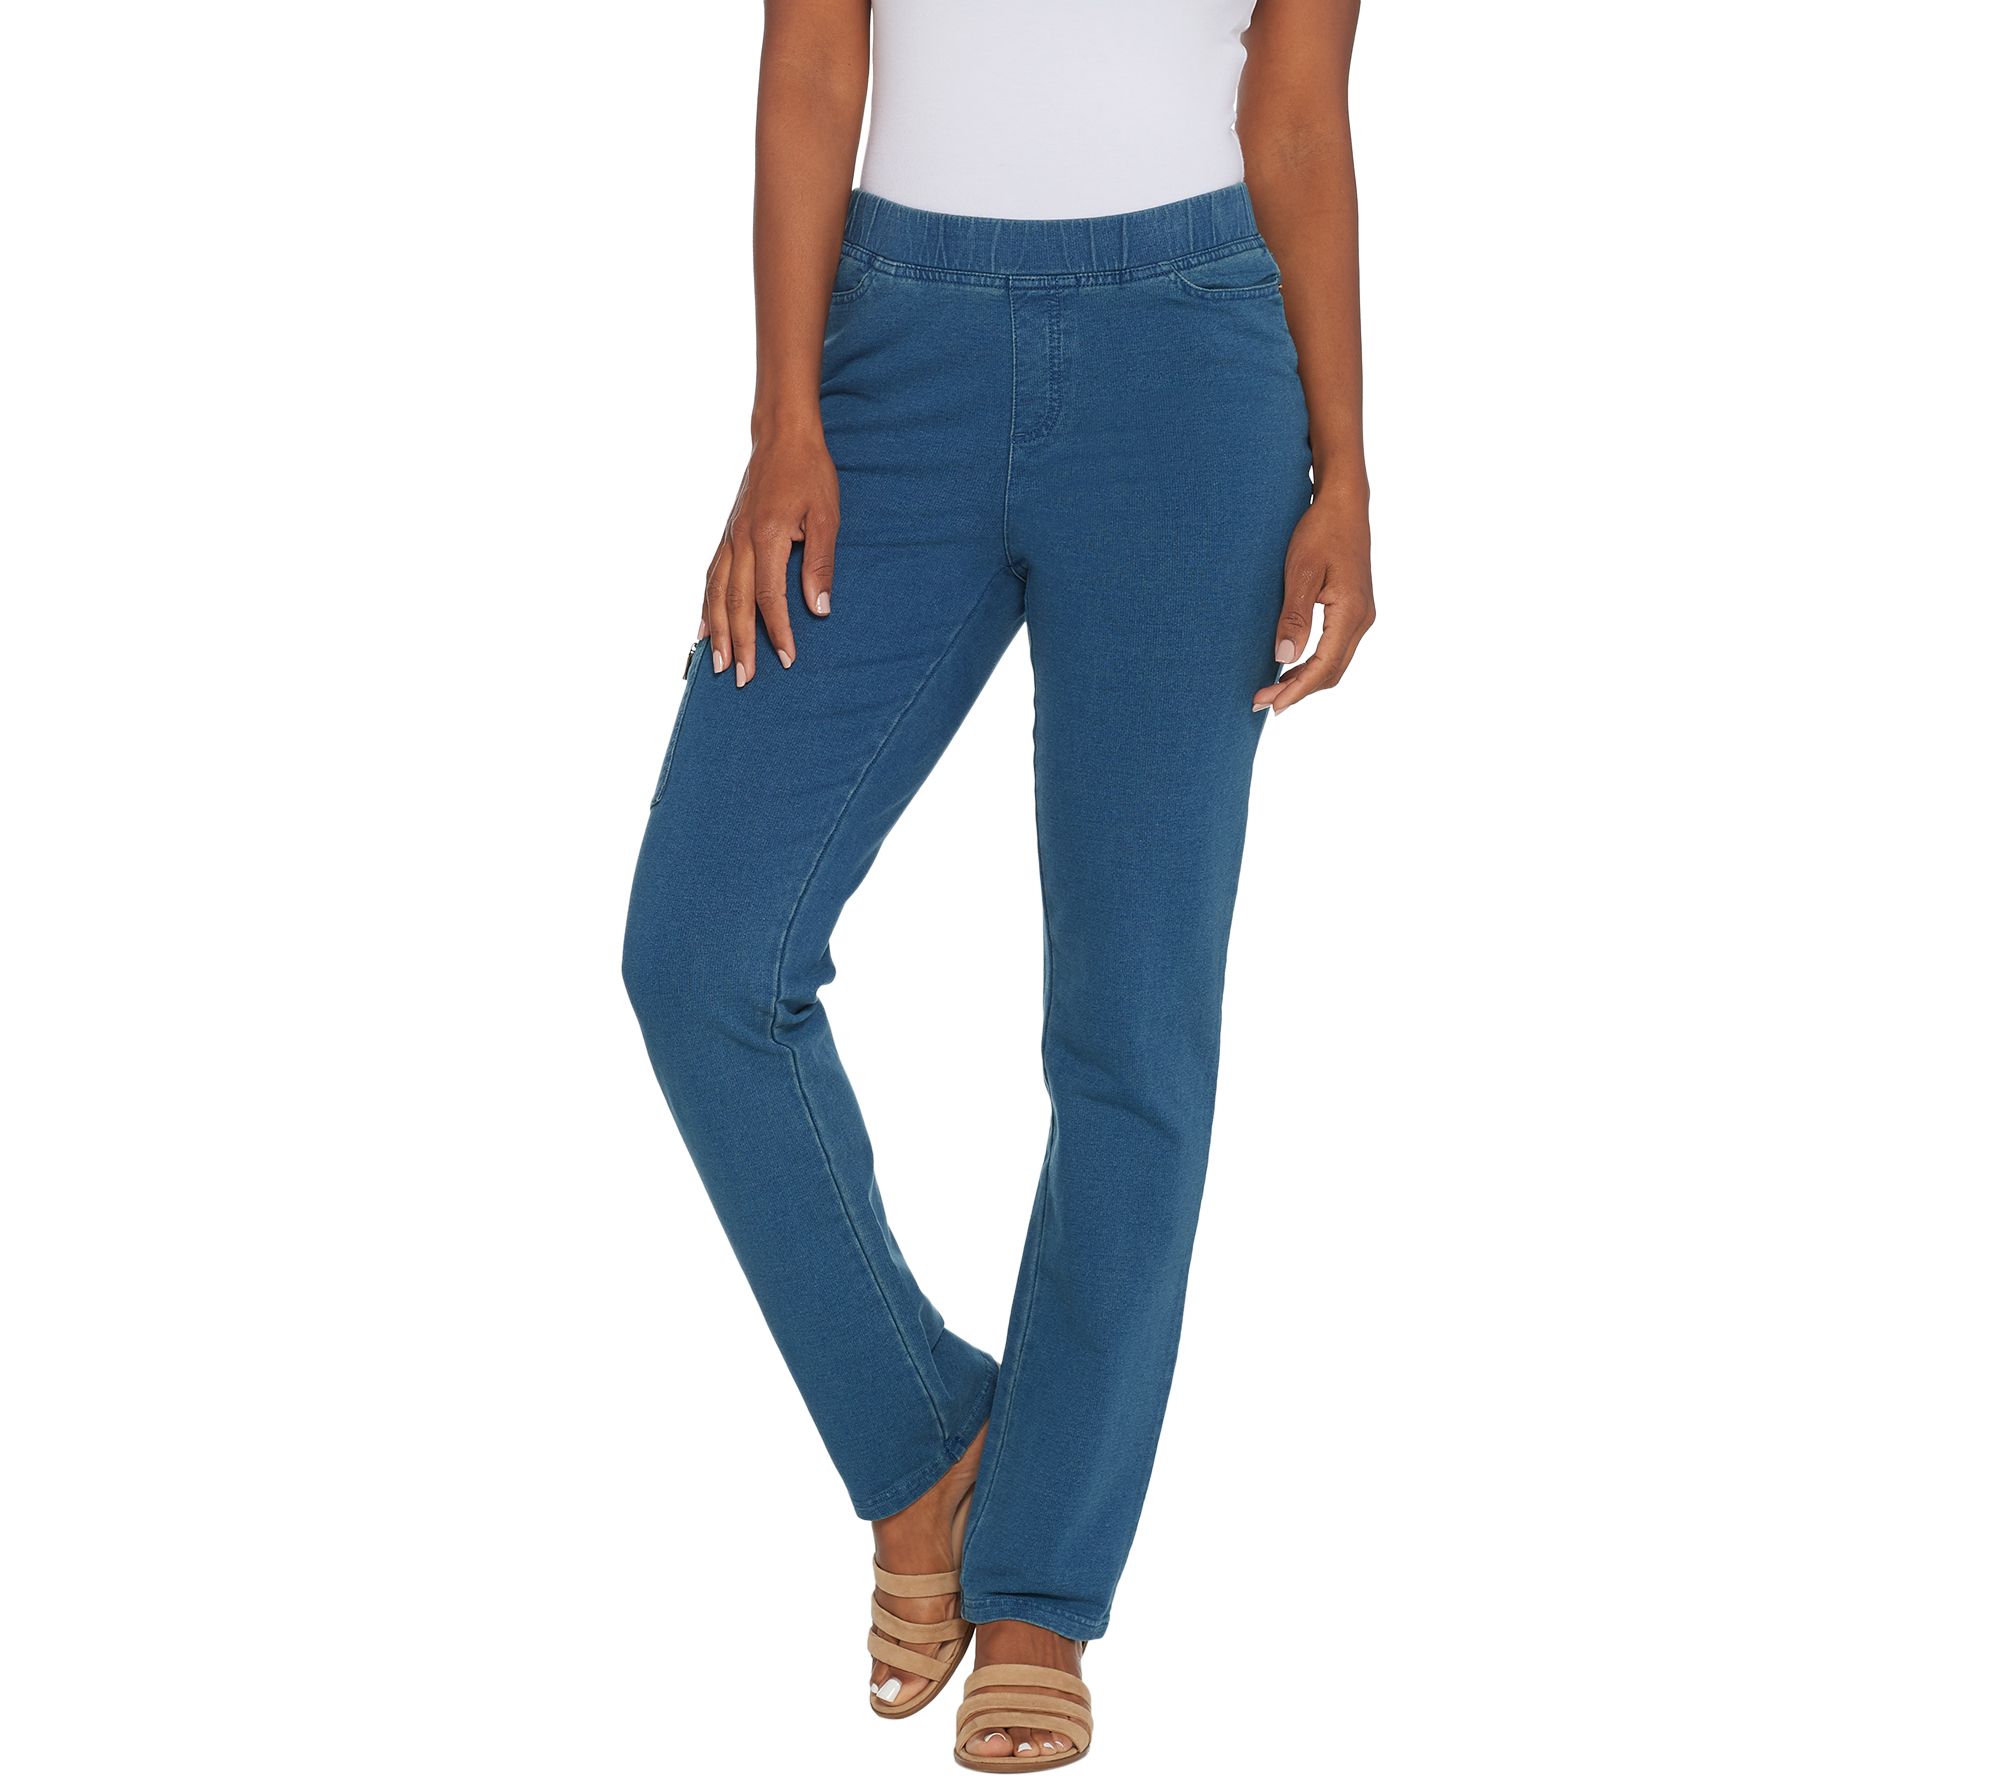 RealSize Women's 4 Pocket Stretch Pull On Bootcut Jeans, Sizes S-XXL,  Available in Petite 